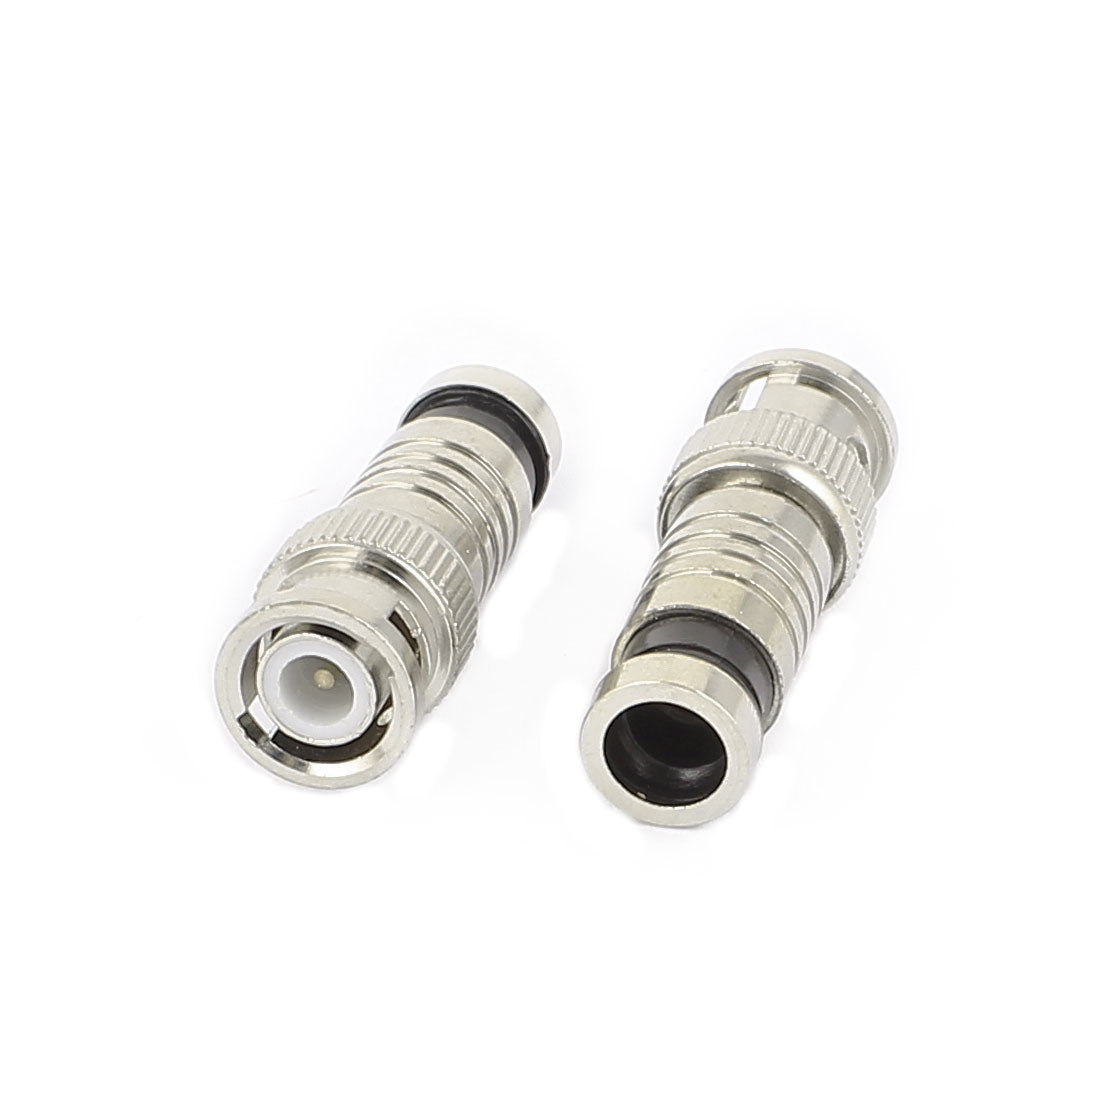 uxcell Uxcell 50 Pcs BNC Male Compression Connector Adapter RG59 Security Coaxial Cable CCTV Camera